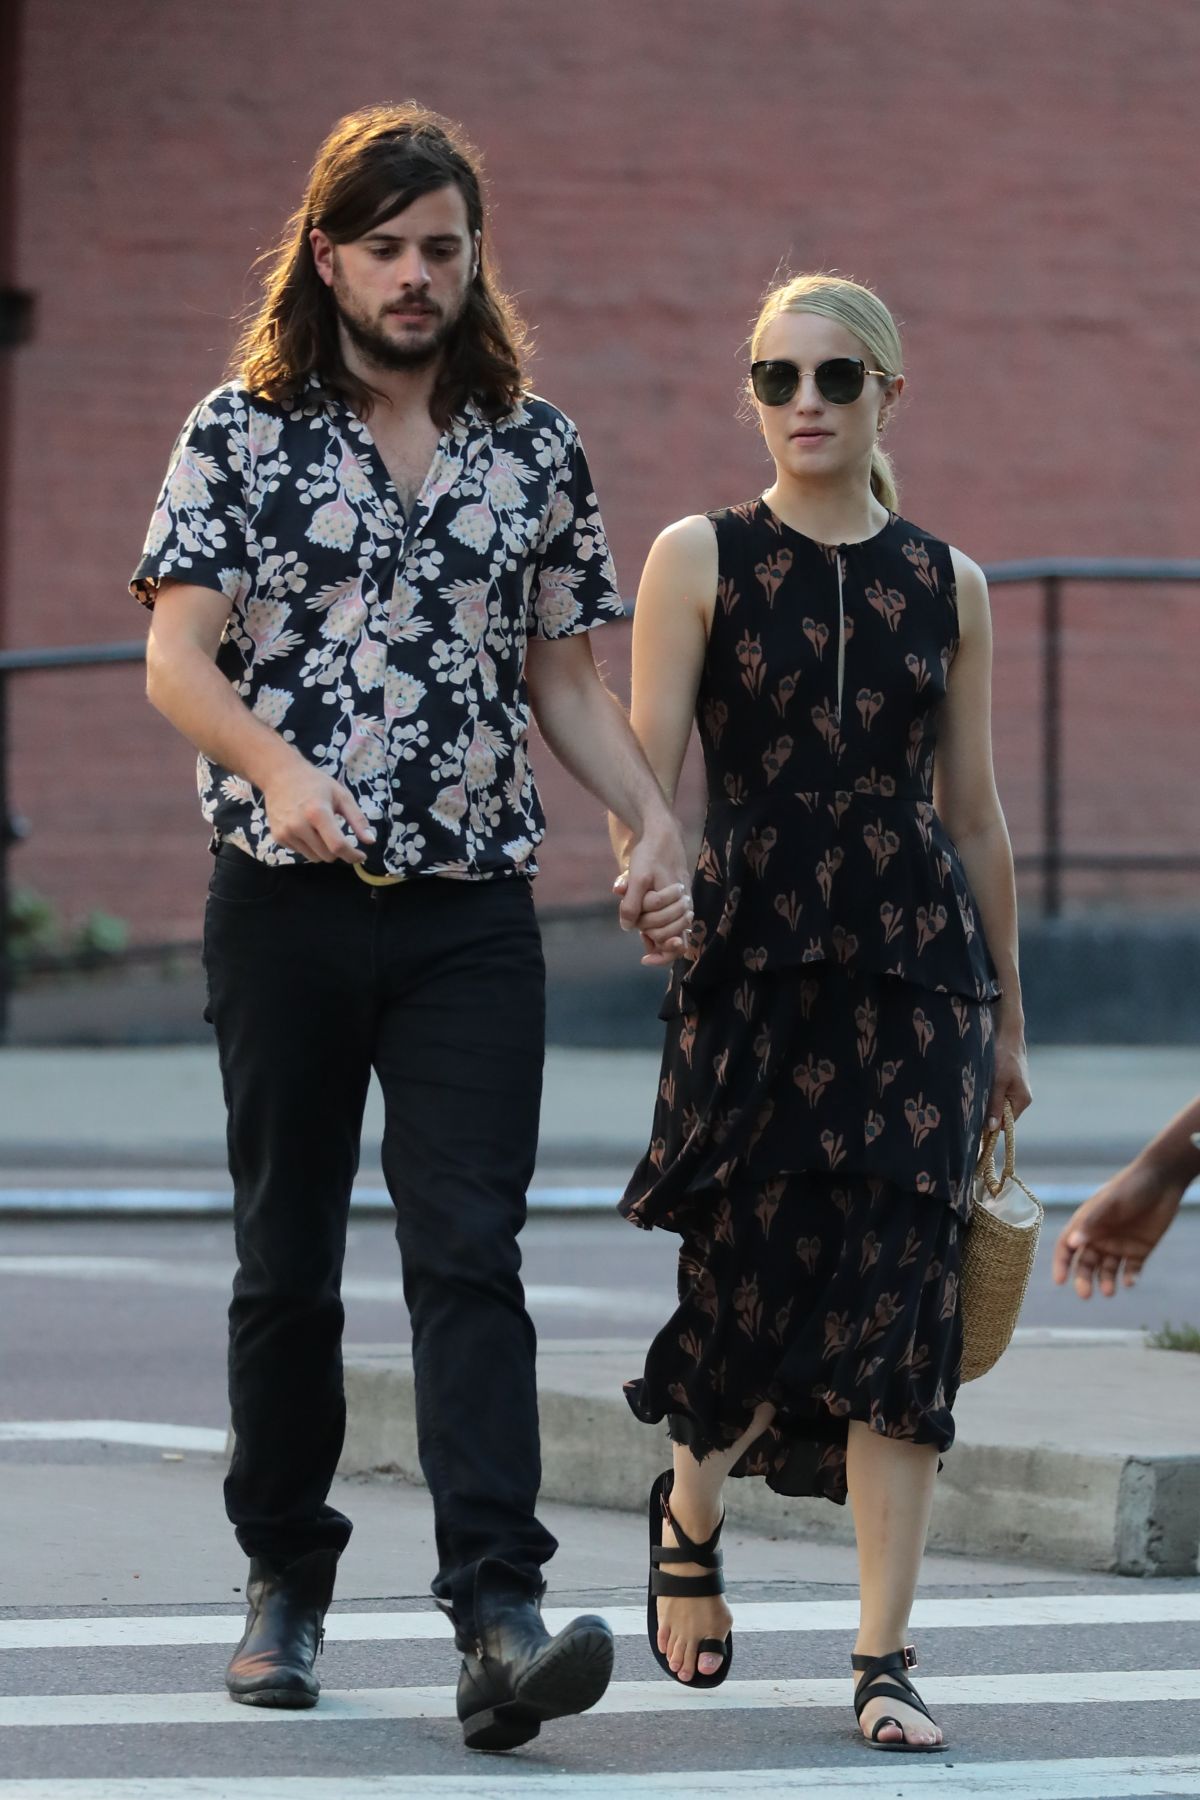 dianna-agron-and-winston-marshall-out-in-new-york-07-09-2018-12.jpg